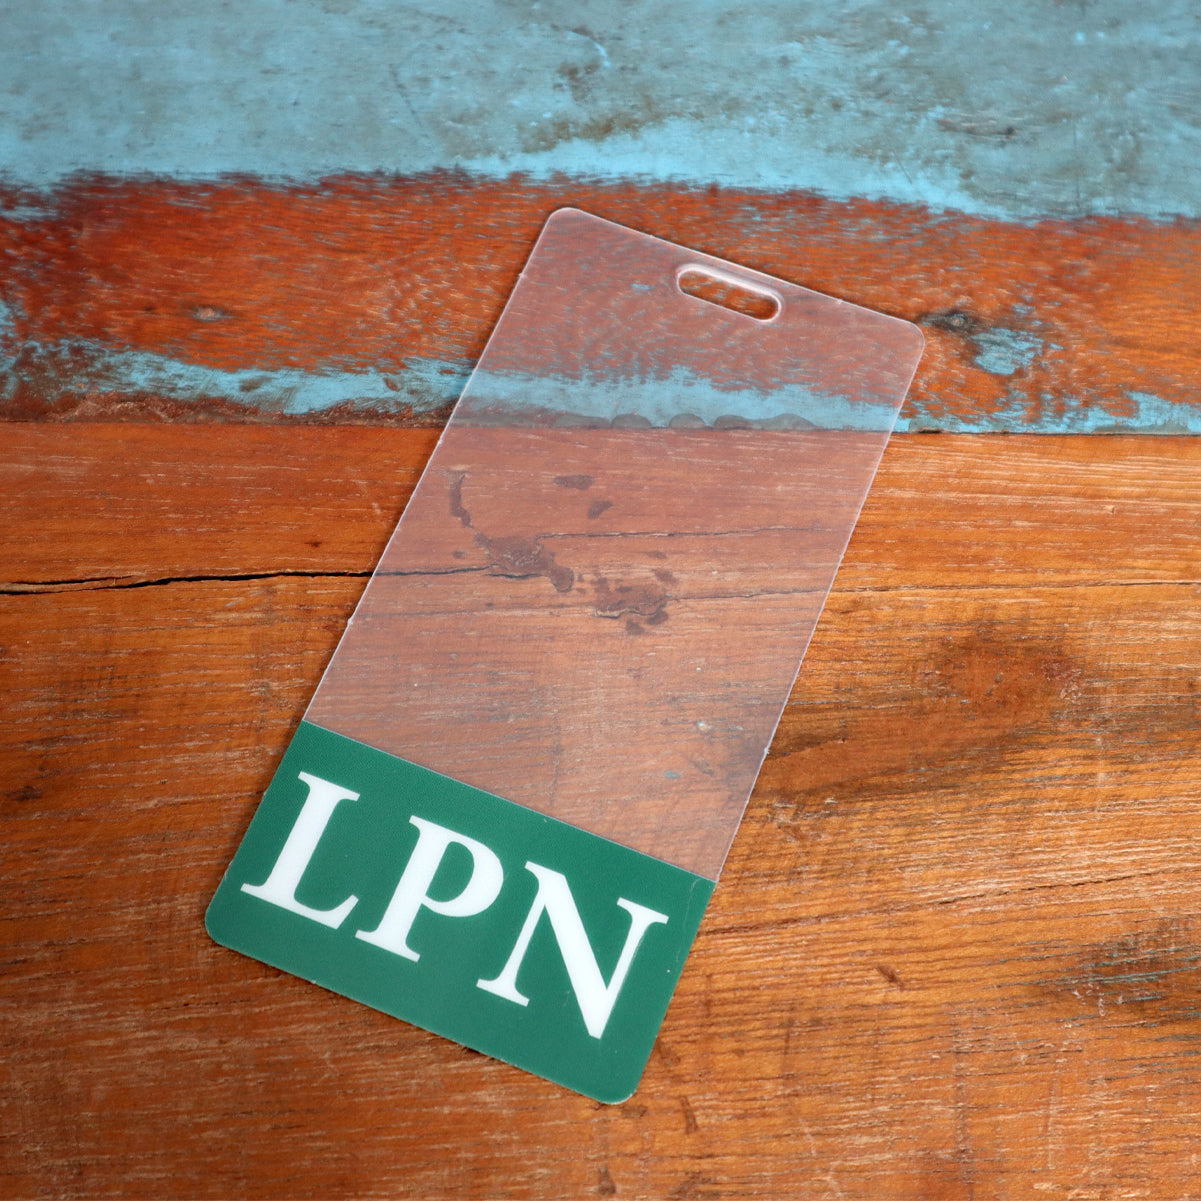 A **Clear LPN Badge Buddy Vertical with Green Border for Licensed Practical Nurses** is placed on a wooden surface, functioning as an LPN Badge Buddy for Licensed Practical Nurses.